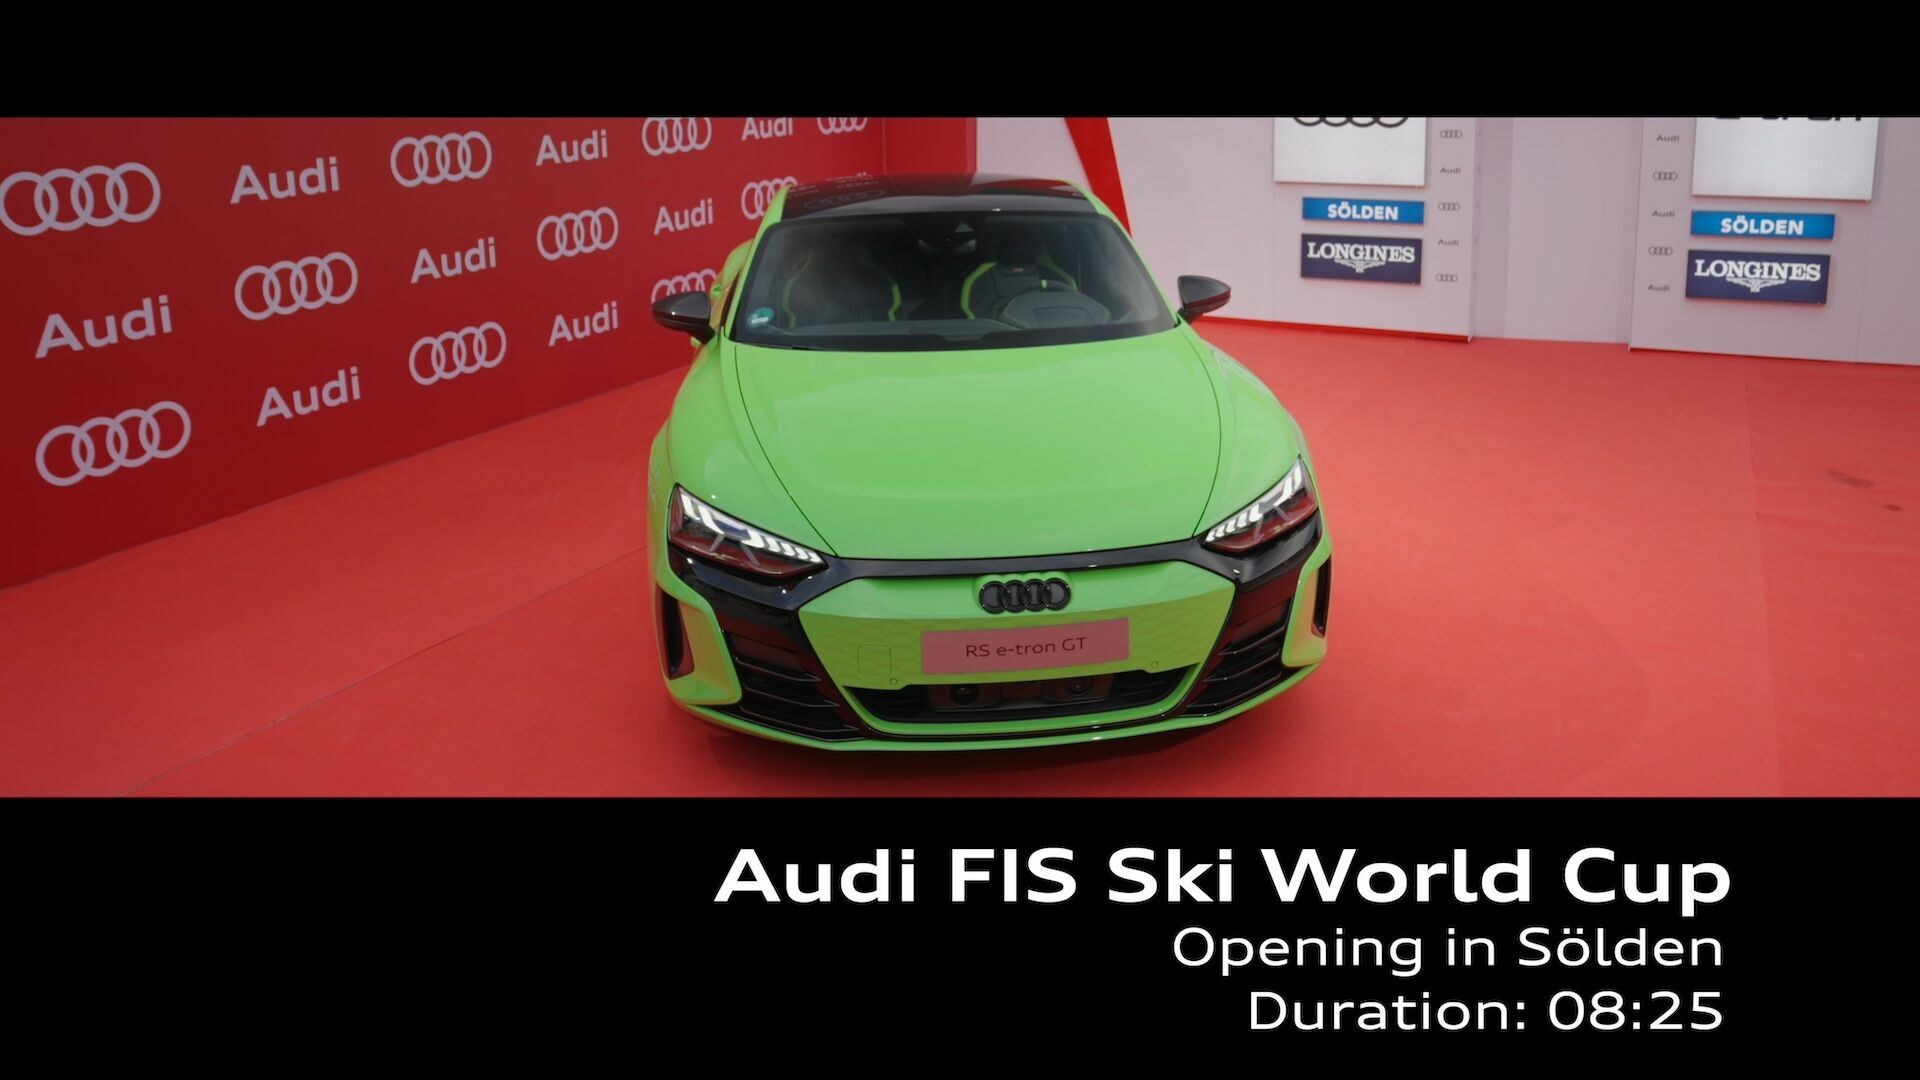 Footage: Audi FIS Ski World Cup Opening